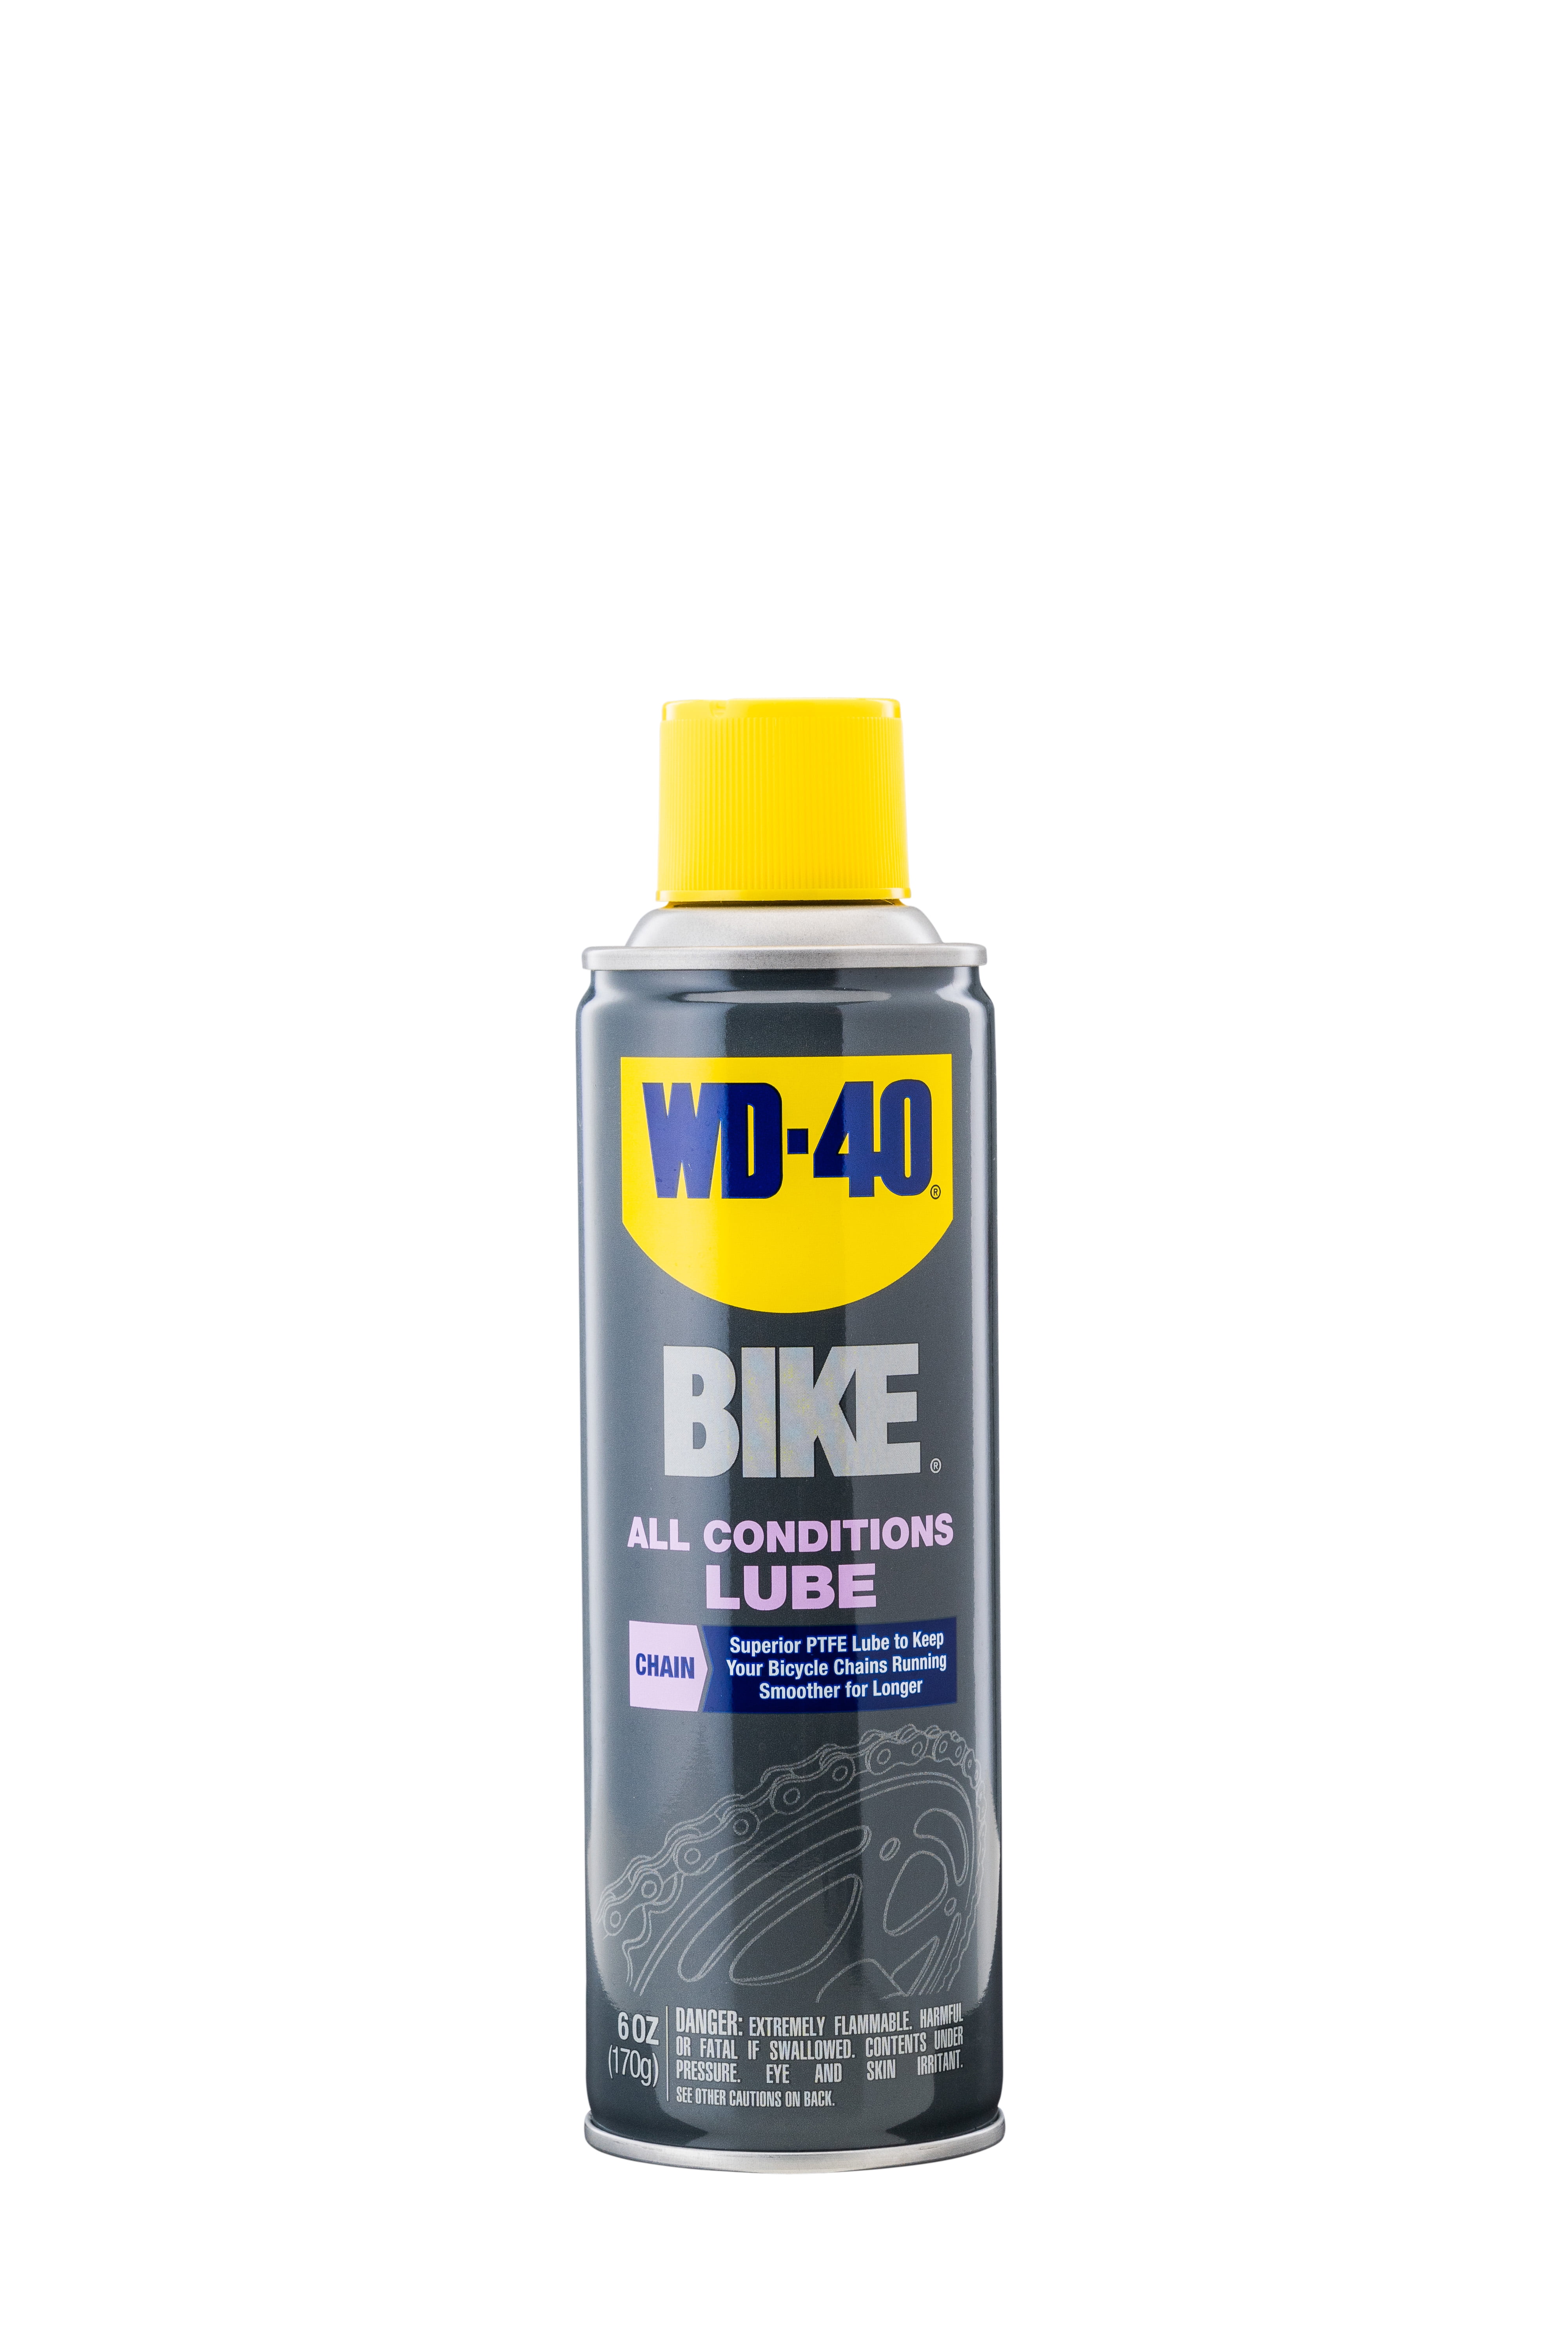 Lubrifiant WD40 Bike chaine conditions humides 100ml - USPROBIKES